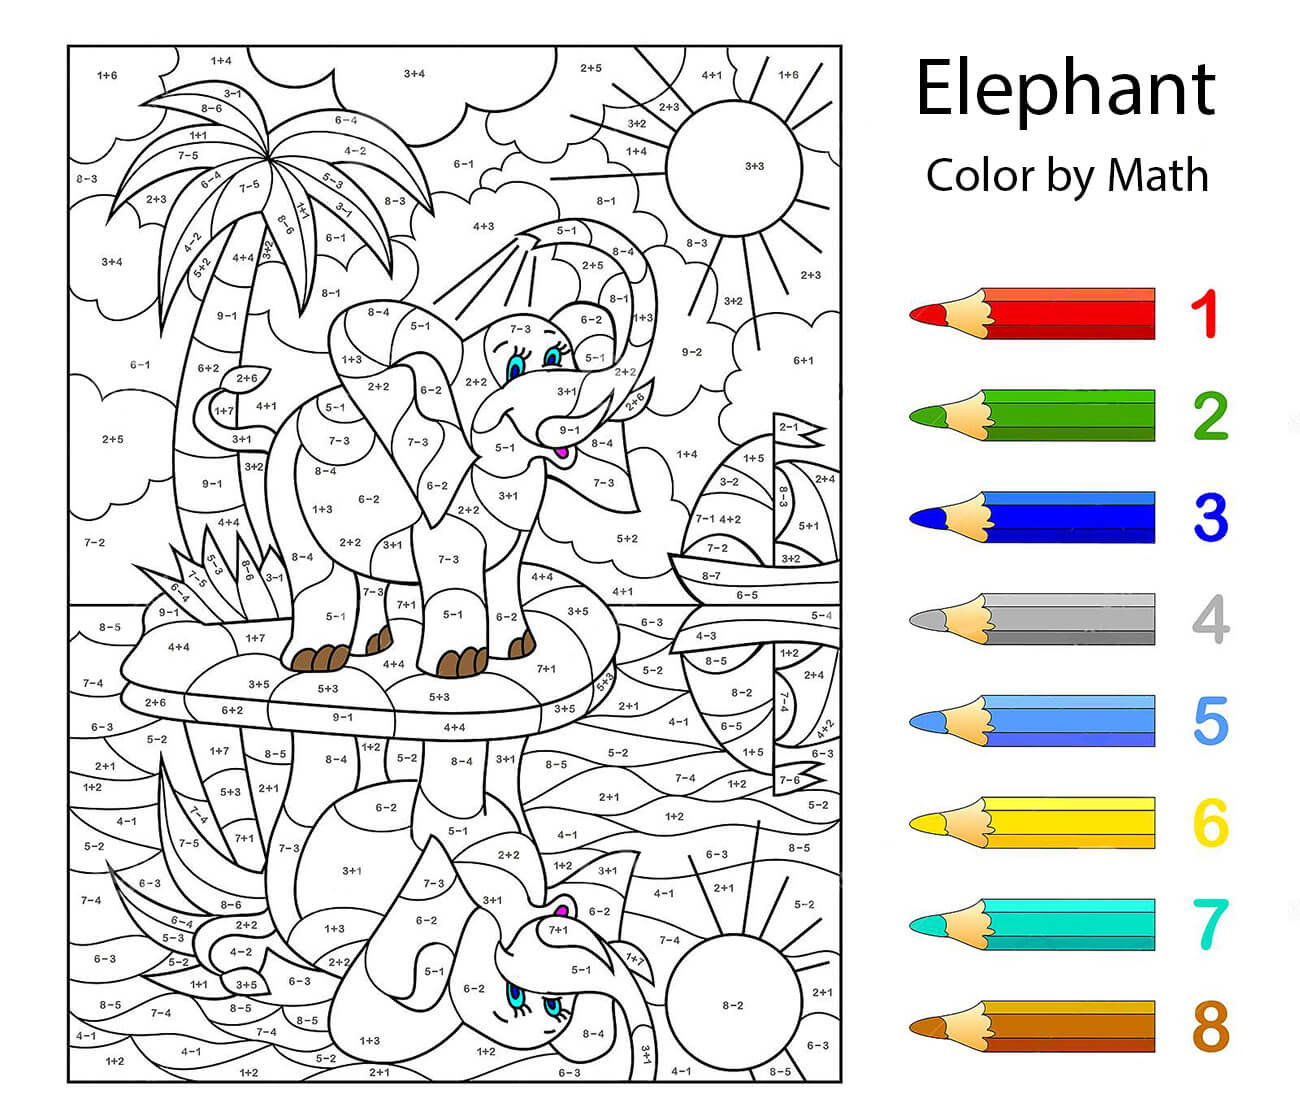 Elephant Coloring by Math